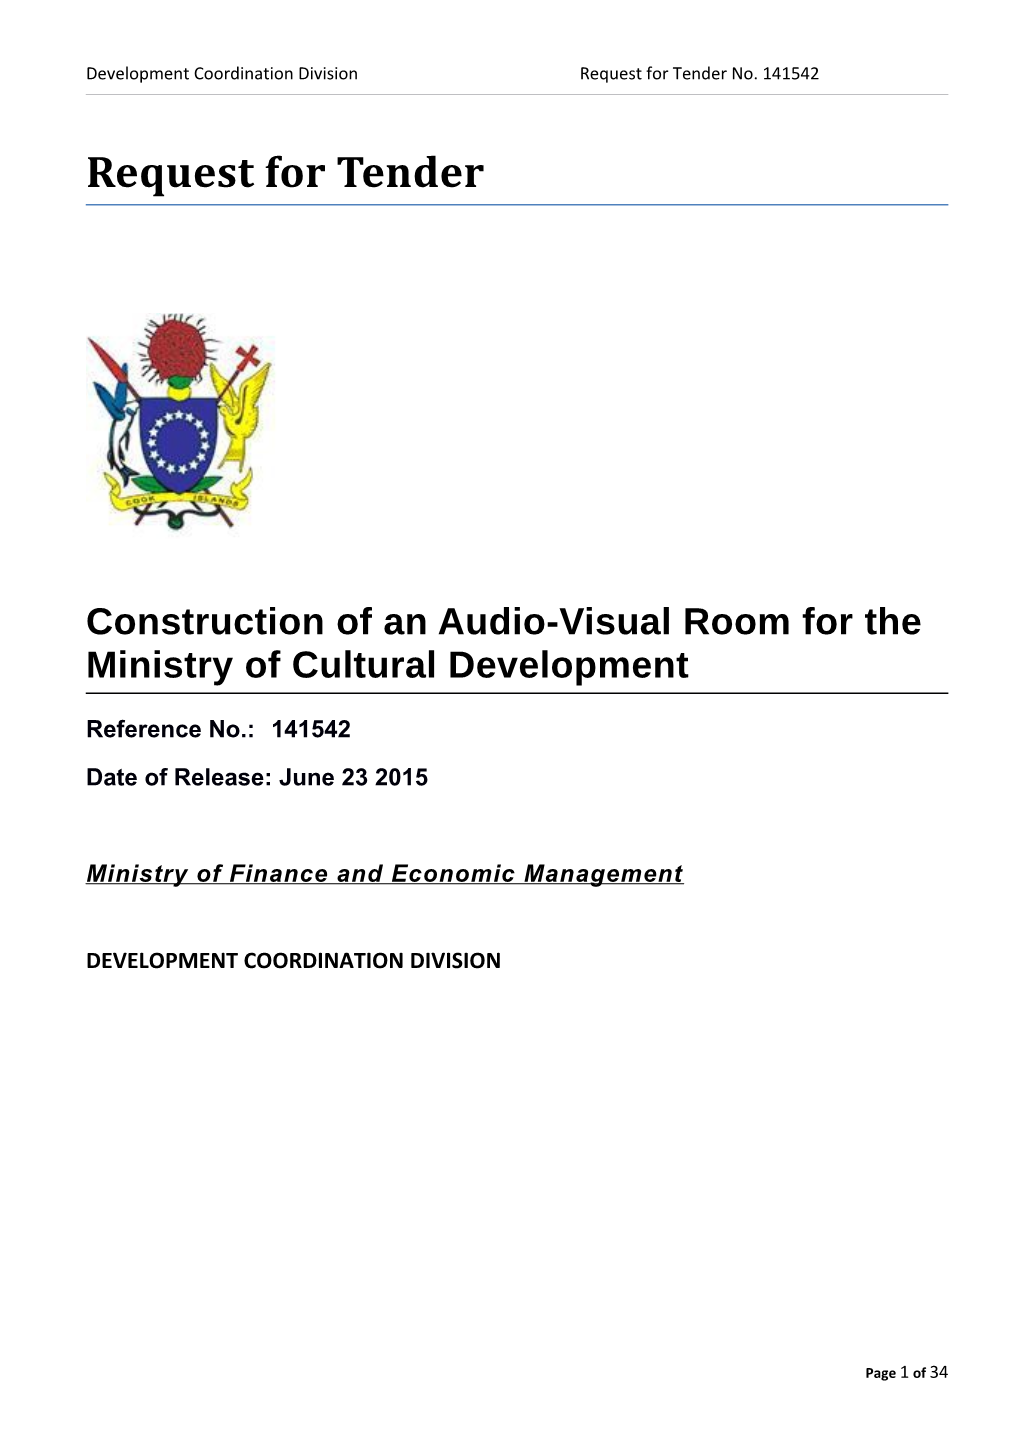 Construction of an Audio-Visual Room for the Ministry of Cultural Development